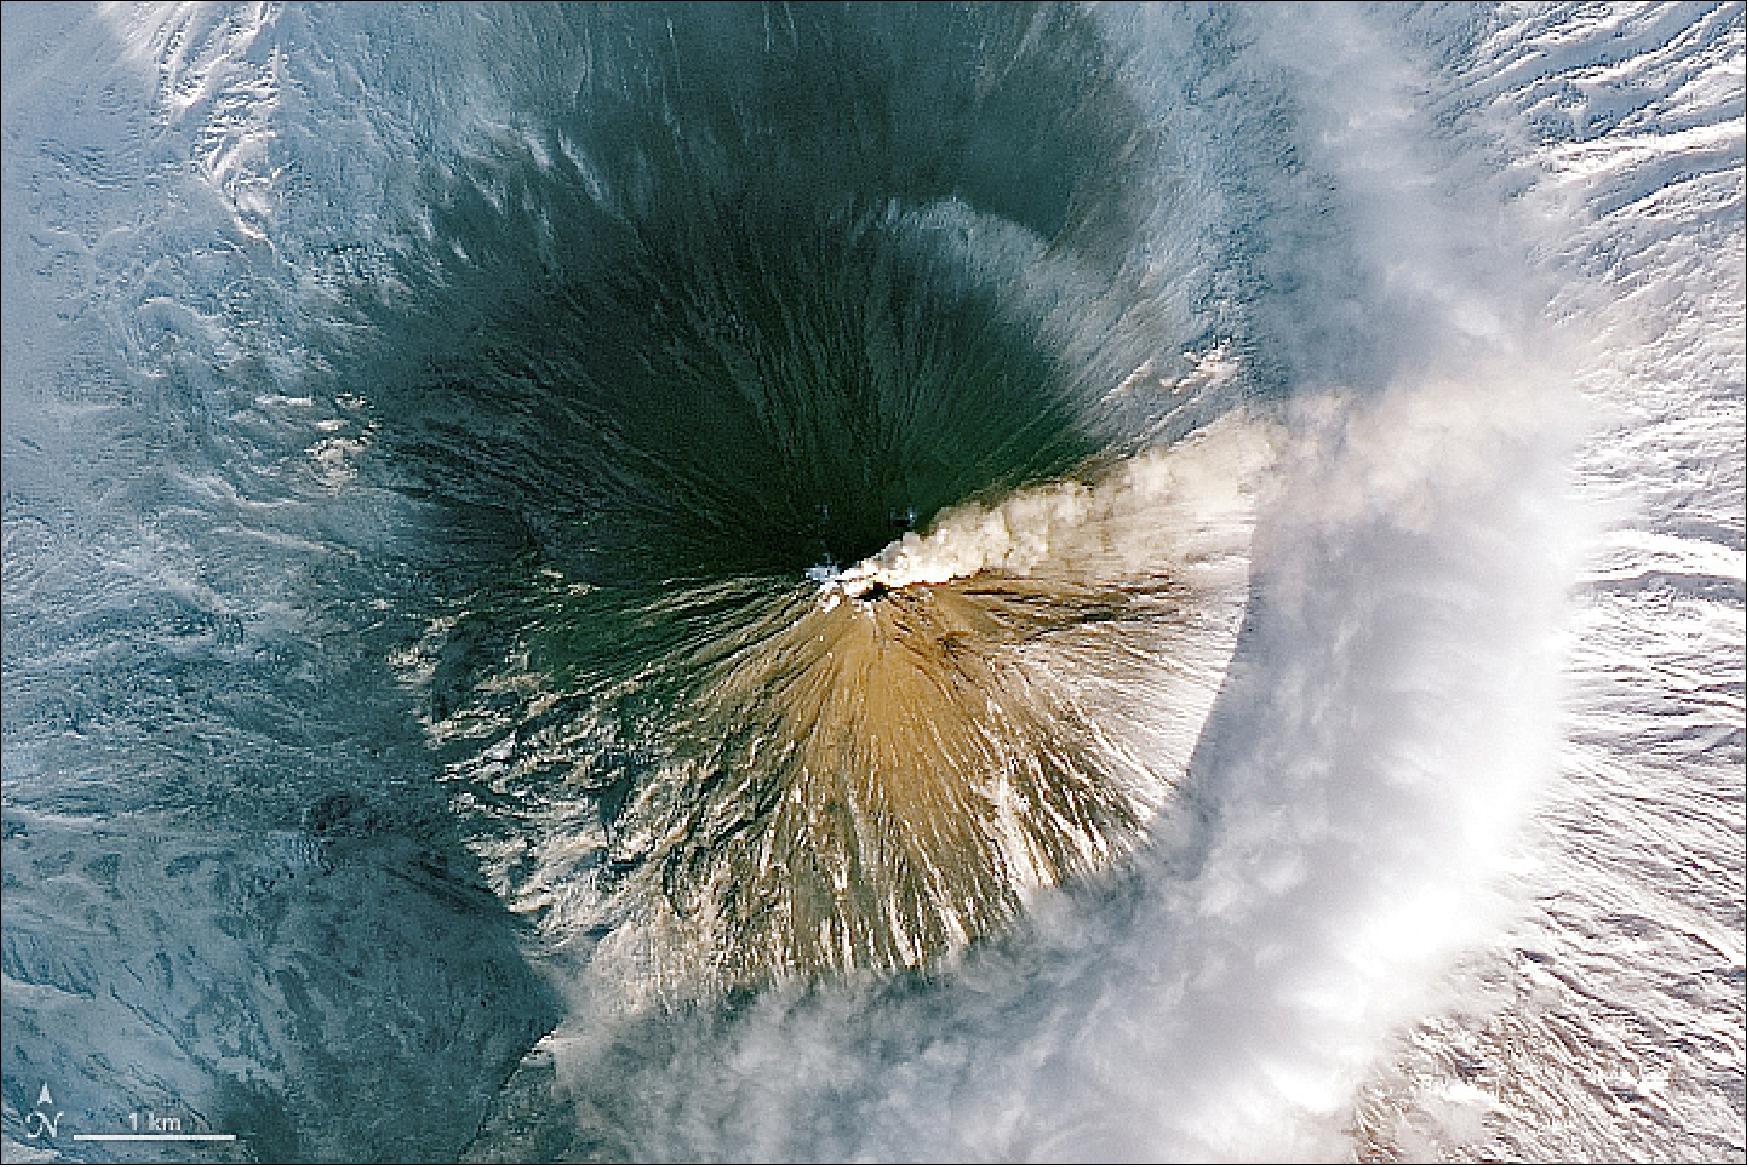 Figure 41: Detail OLI image of the Klyuchevskaya volcano, acquired on 10 January, 2018 (image credit: NASA Earth Observatory, image by Joshua Stevens and Jeff Schmaltz, using Landsat data from the USGS, Story by Michael Carlowicz)